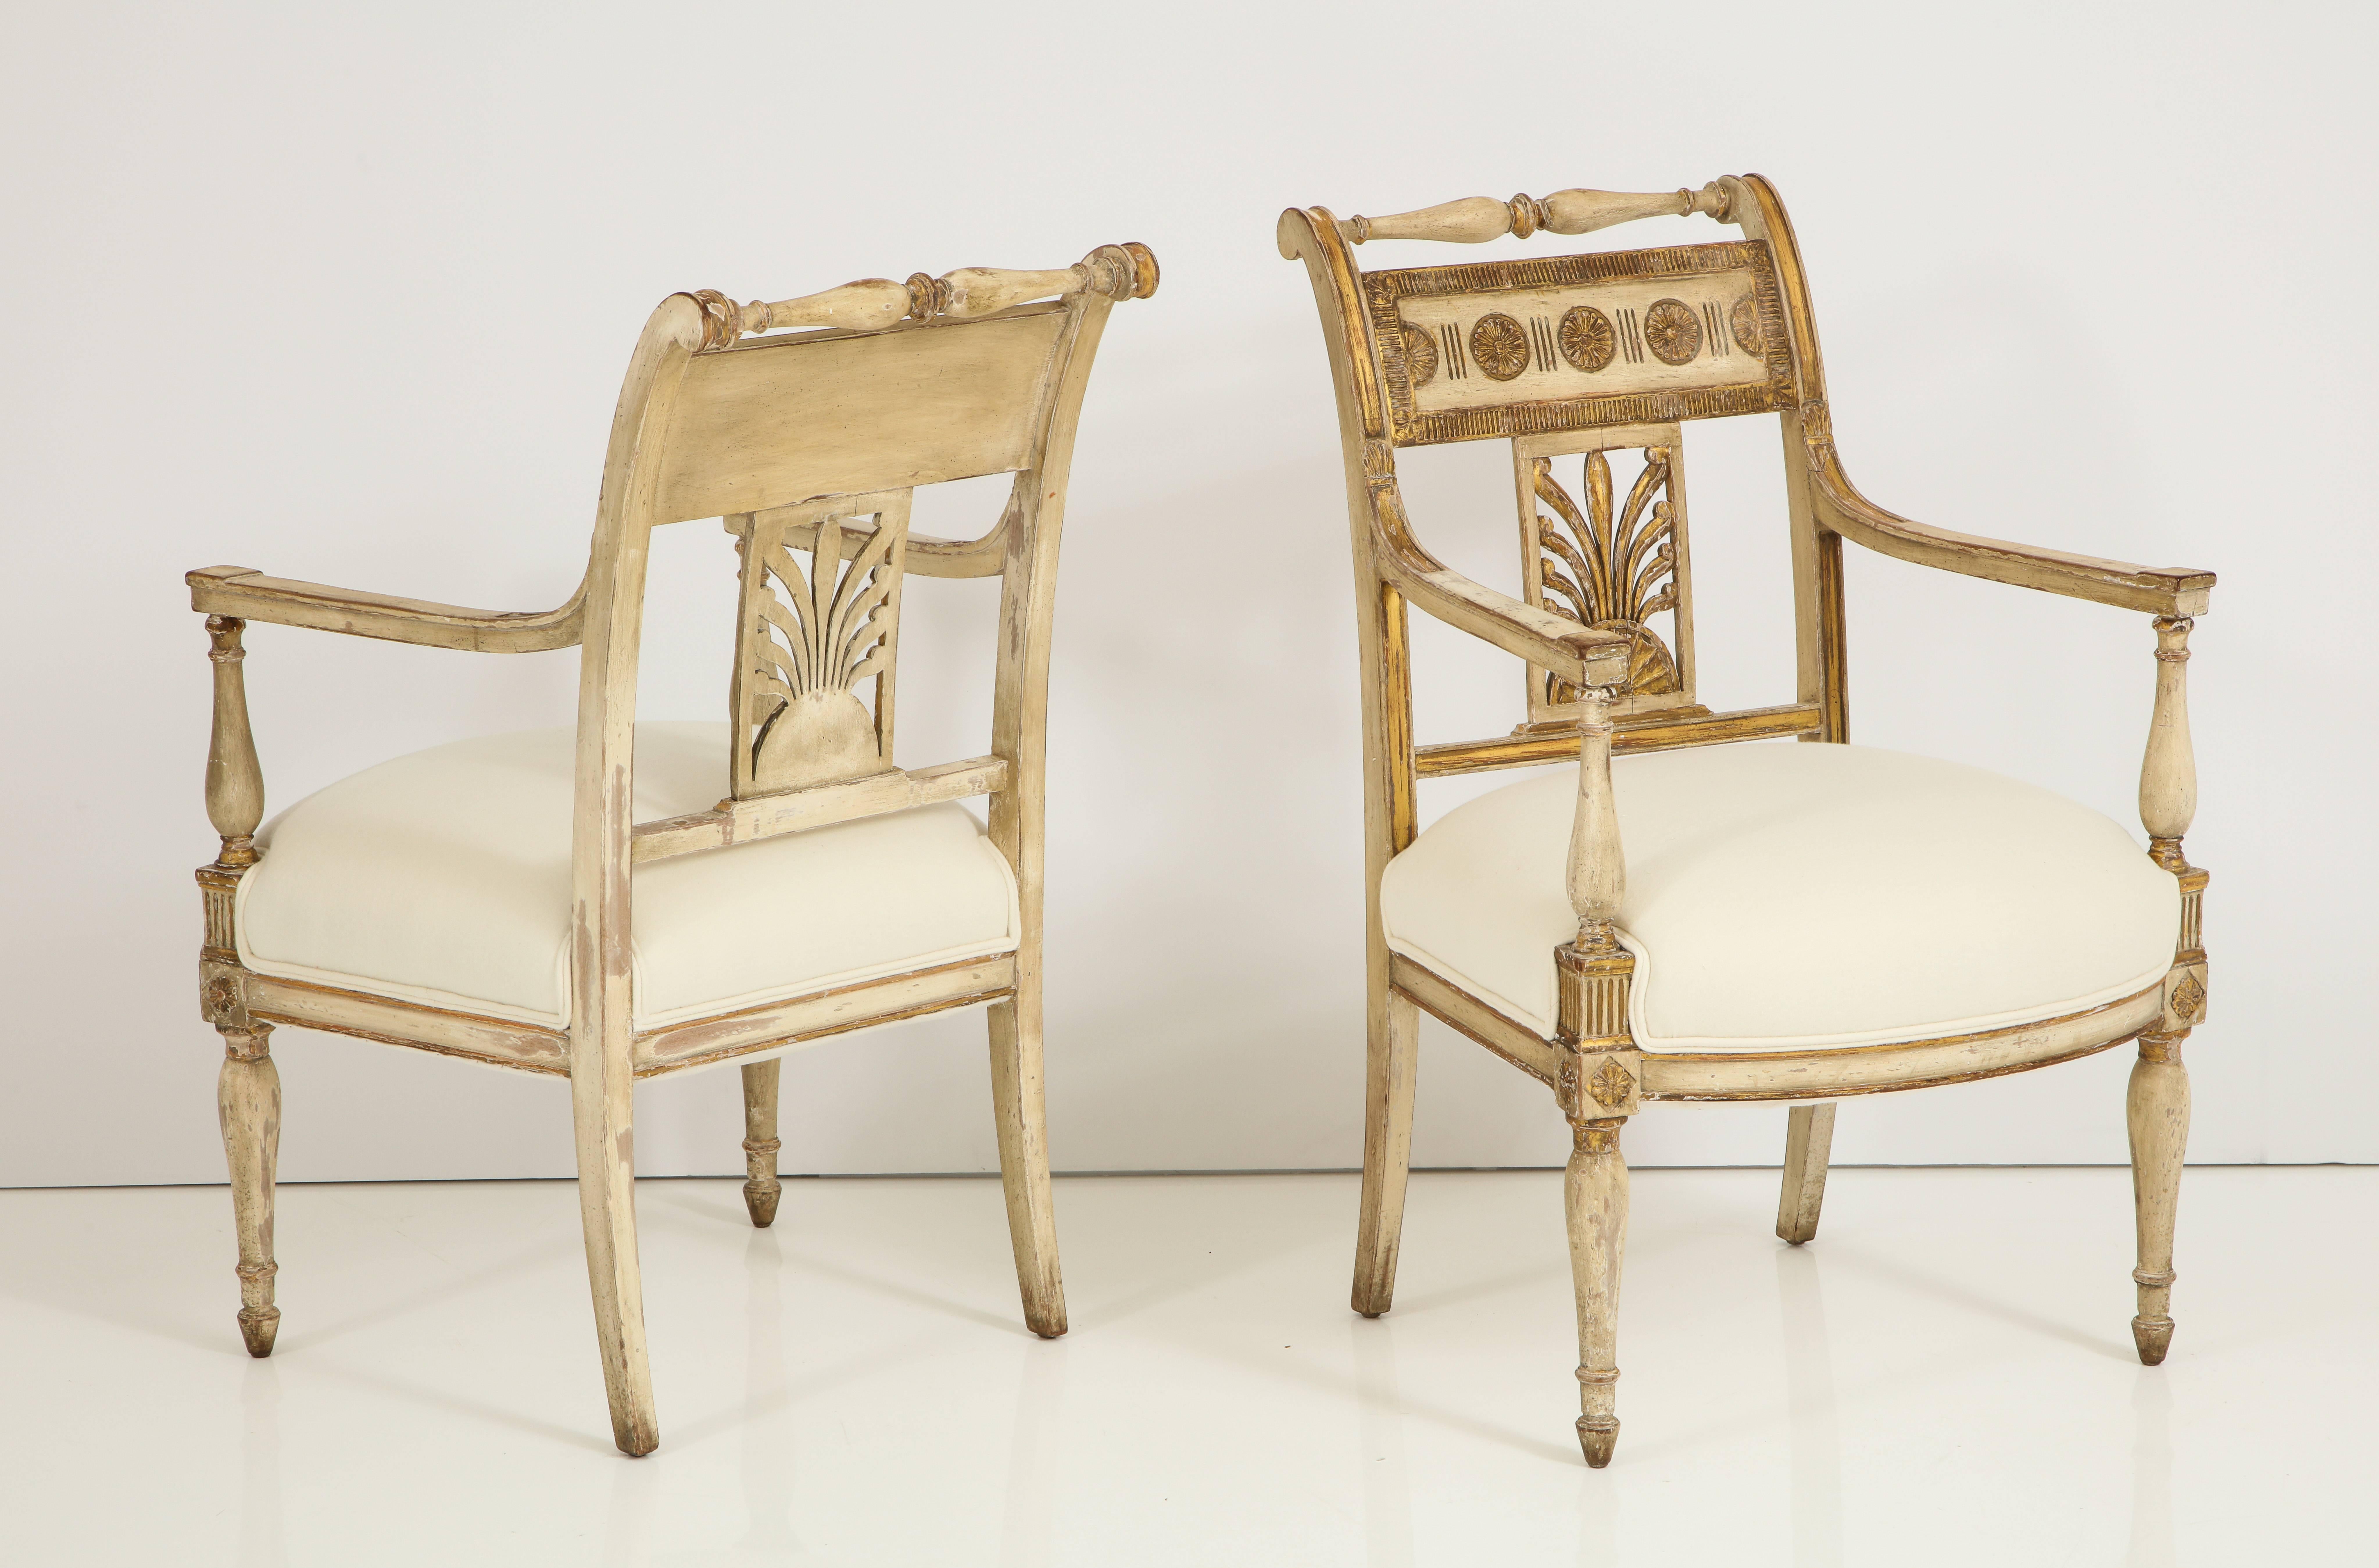 A stunning pair of Italian Neapolitan Empire period carved, painted and parcel gilded armchairs. The backrest with gilded roundels and a central carved fan motif; with carved and gilded rosettes on the headed tapered shaped legs. Newly upholstered